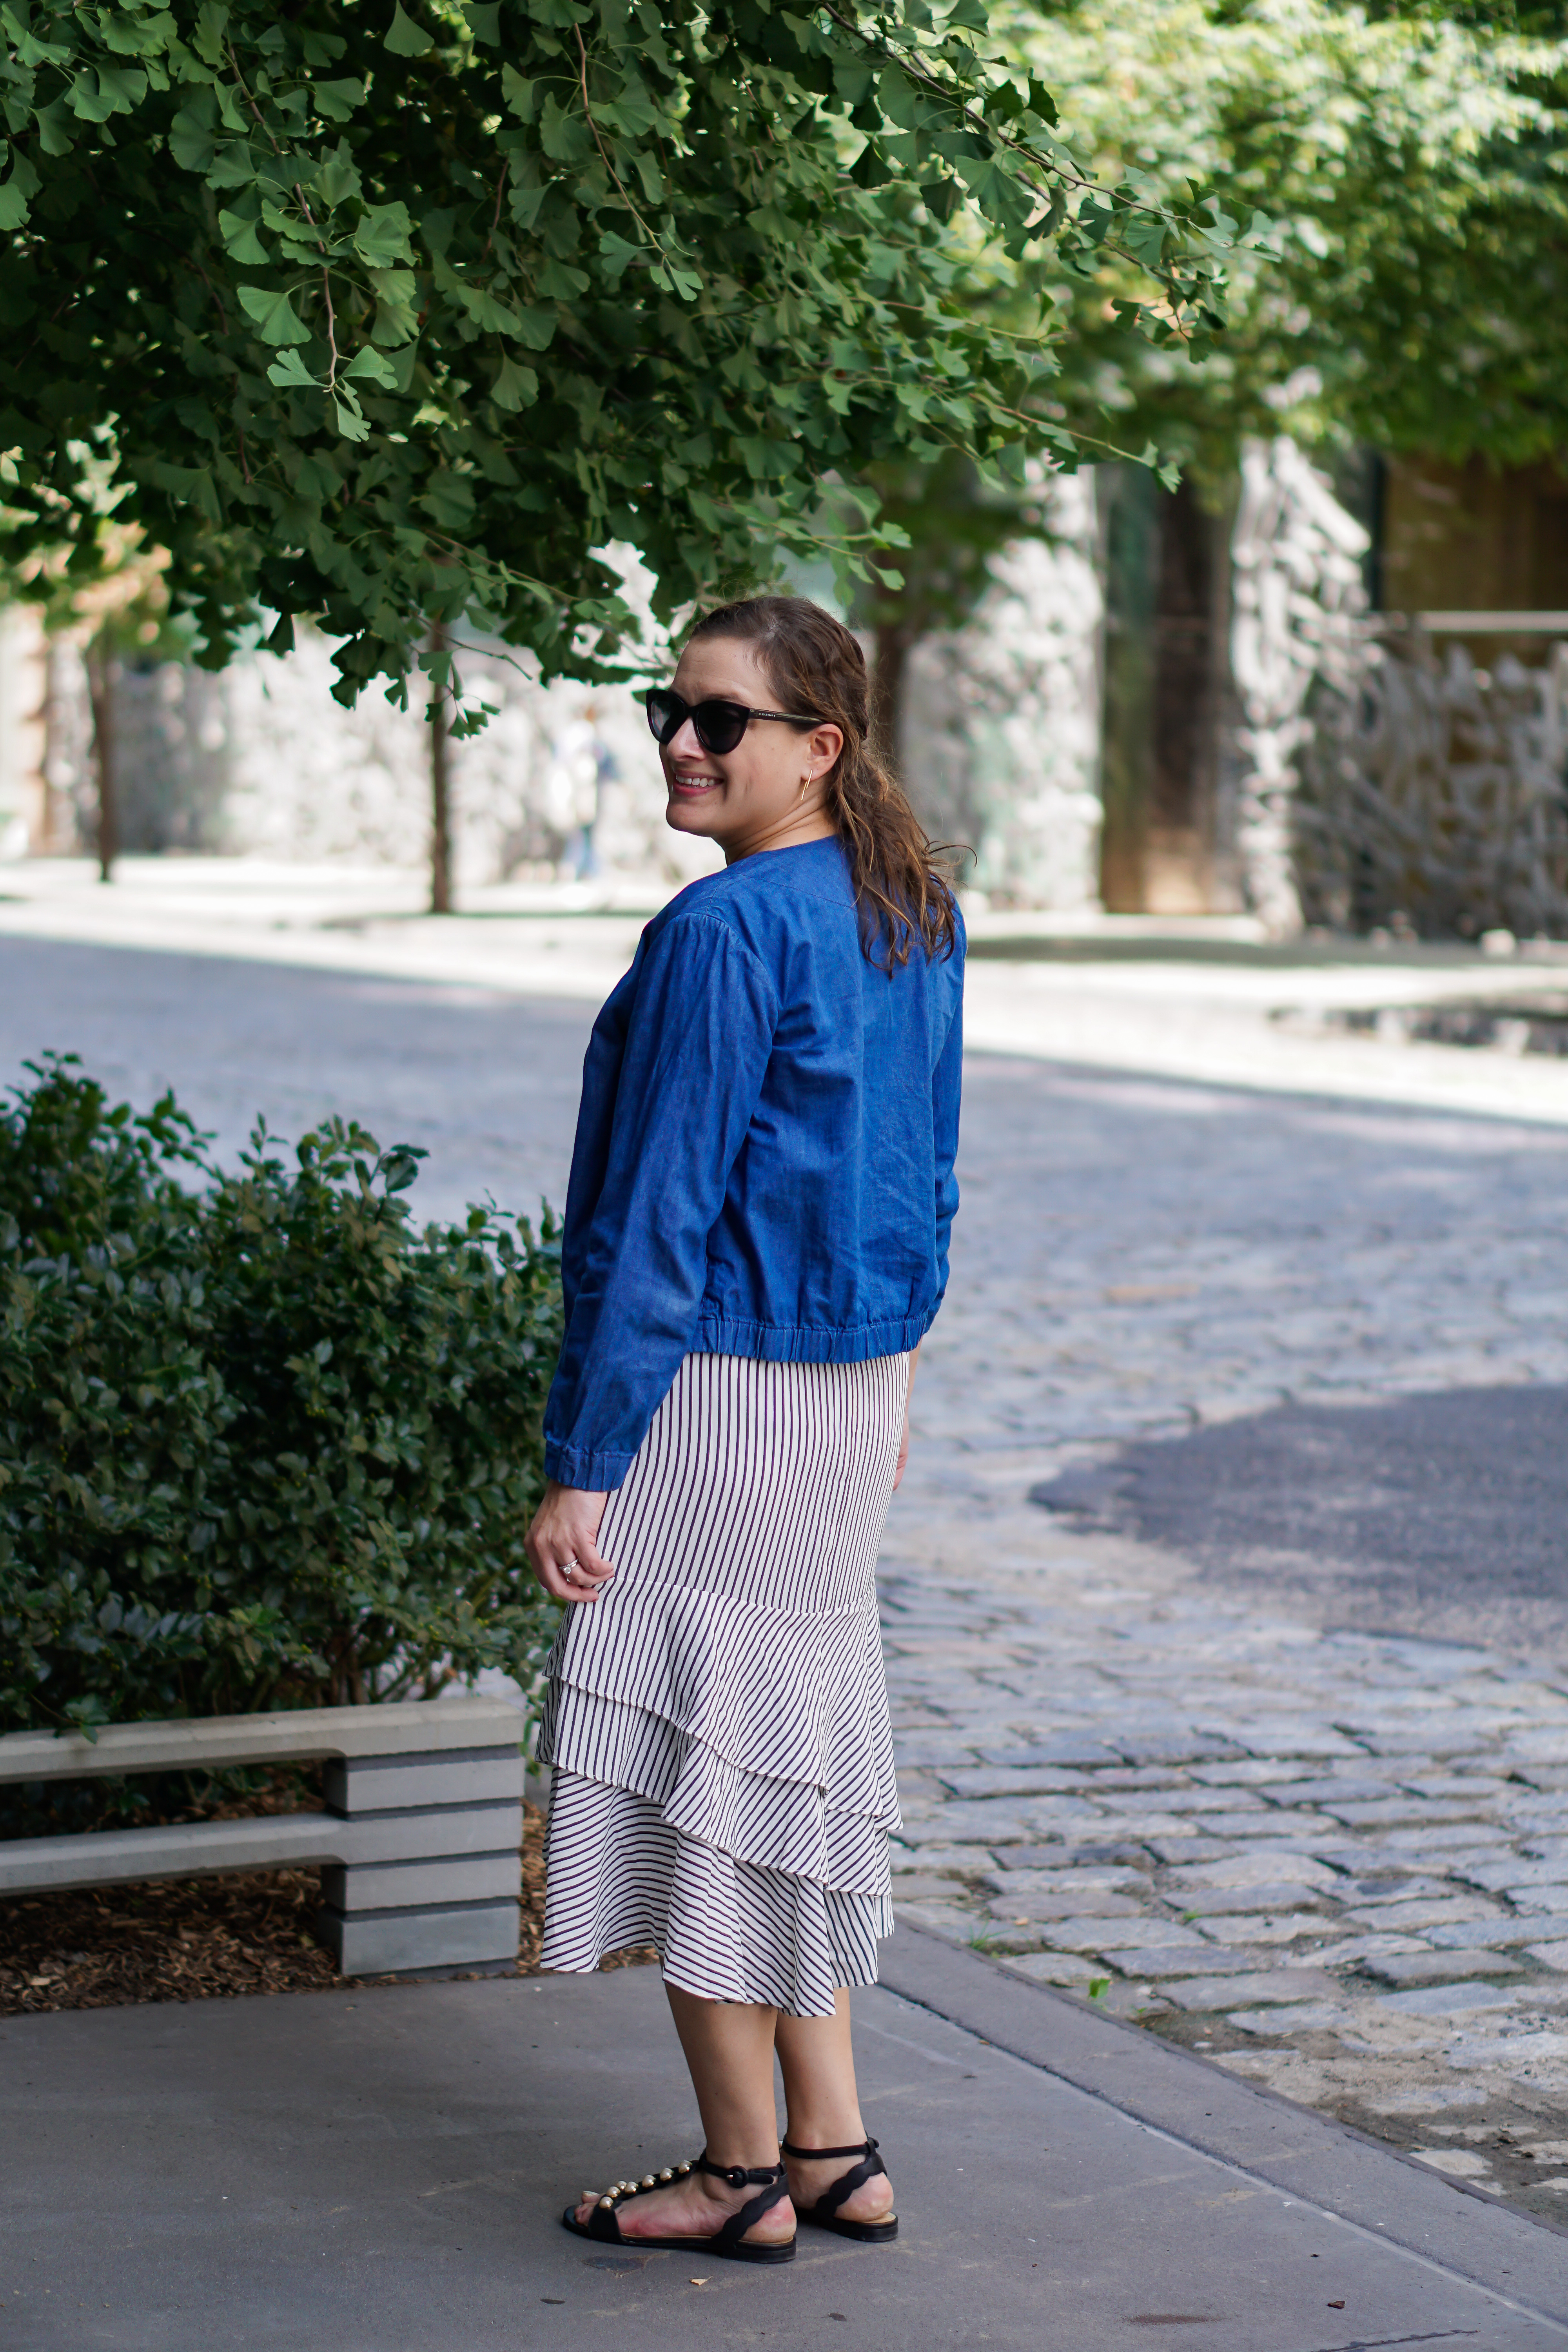 How to style a skirt